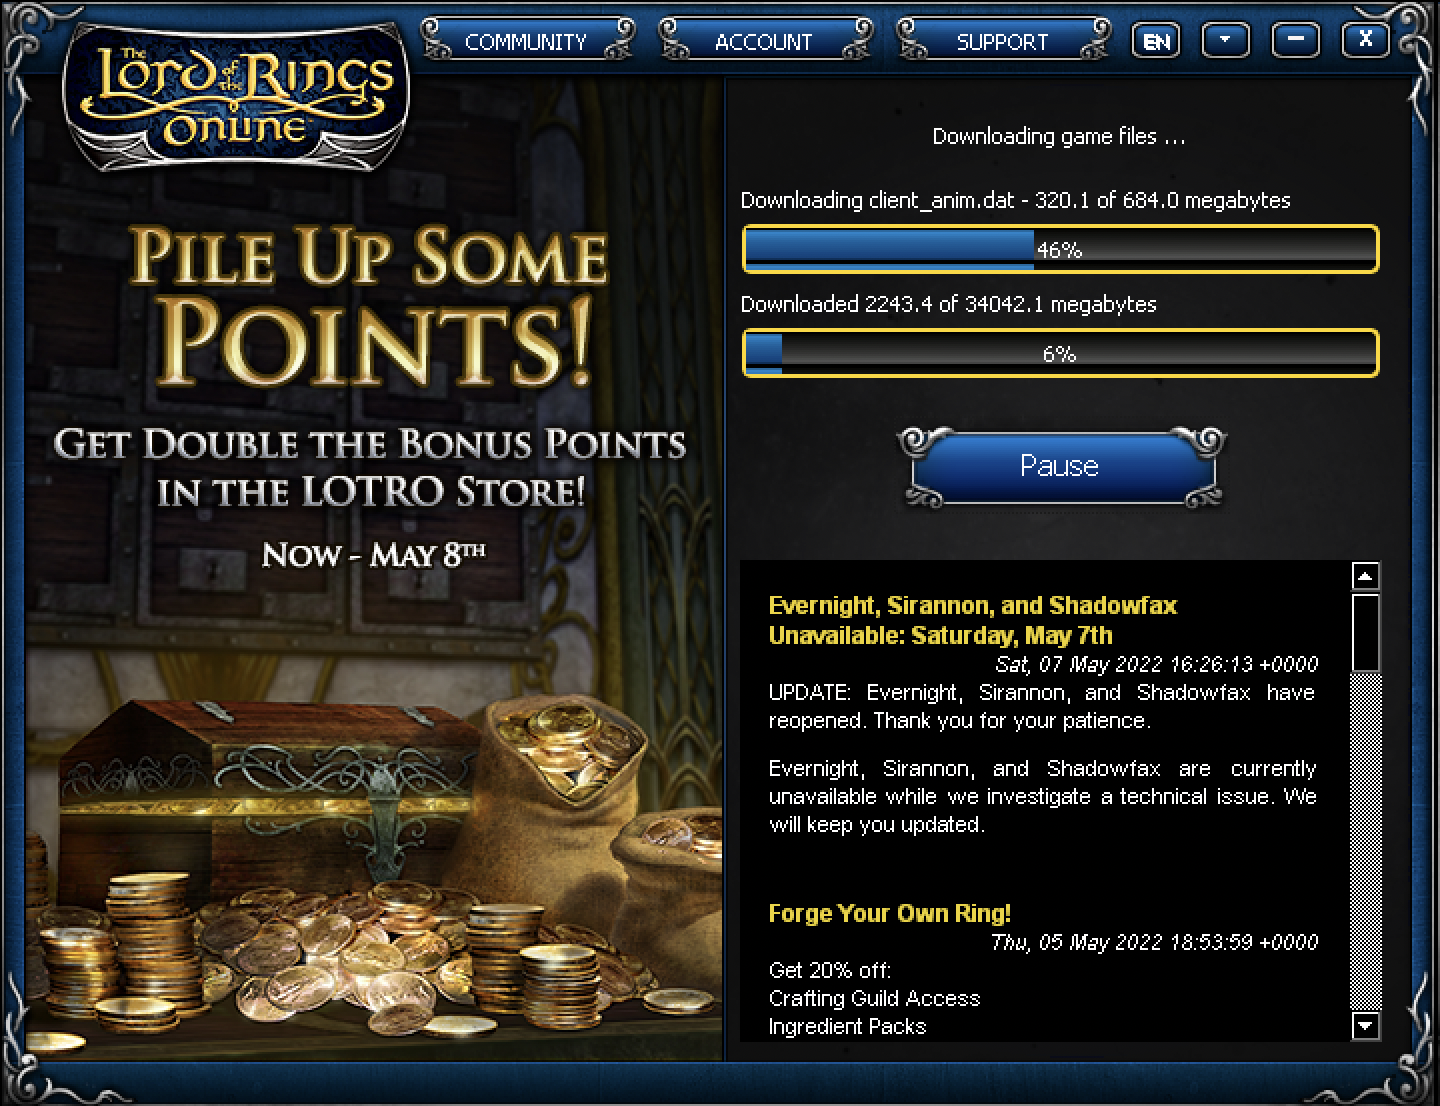 Lord of the Rings Online on Mac: Do not update to Catalina!